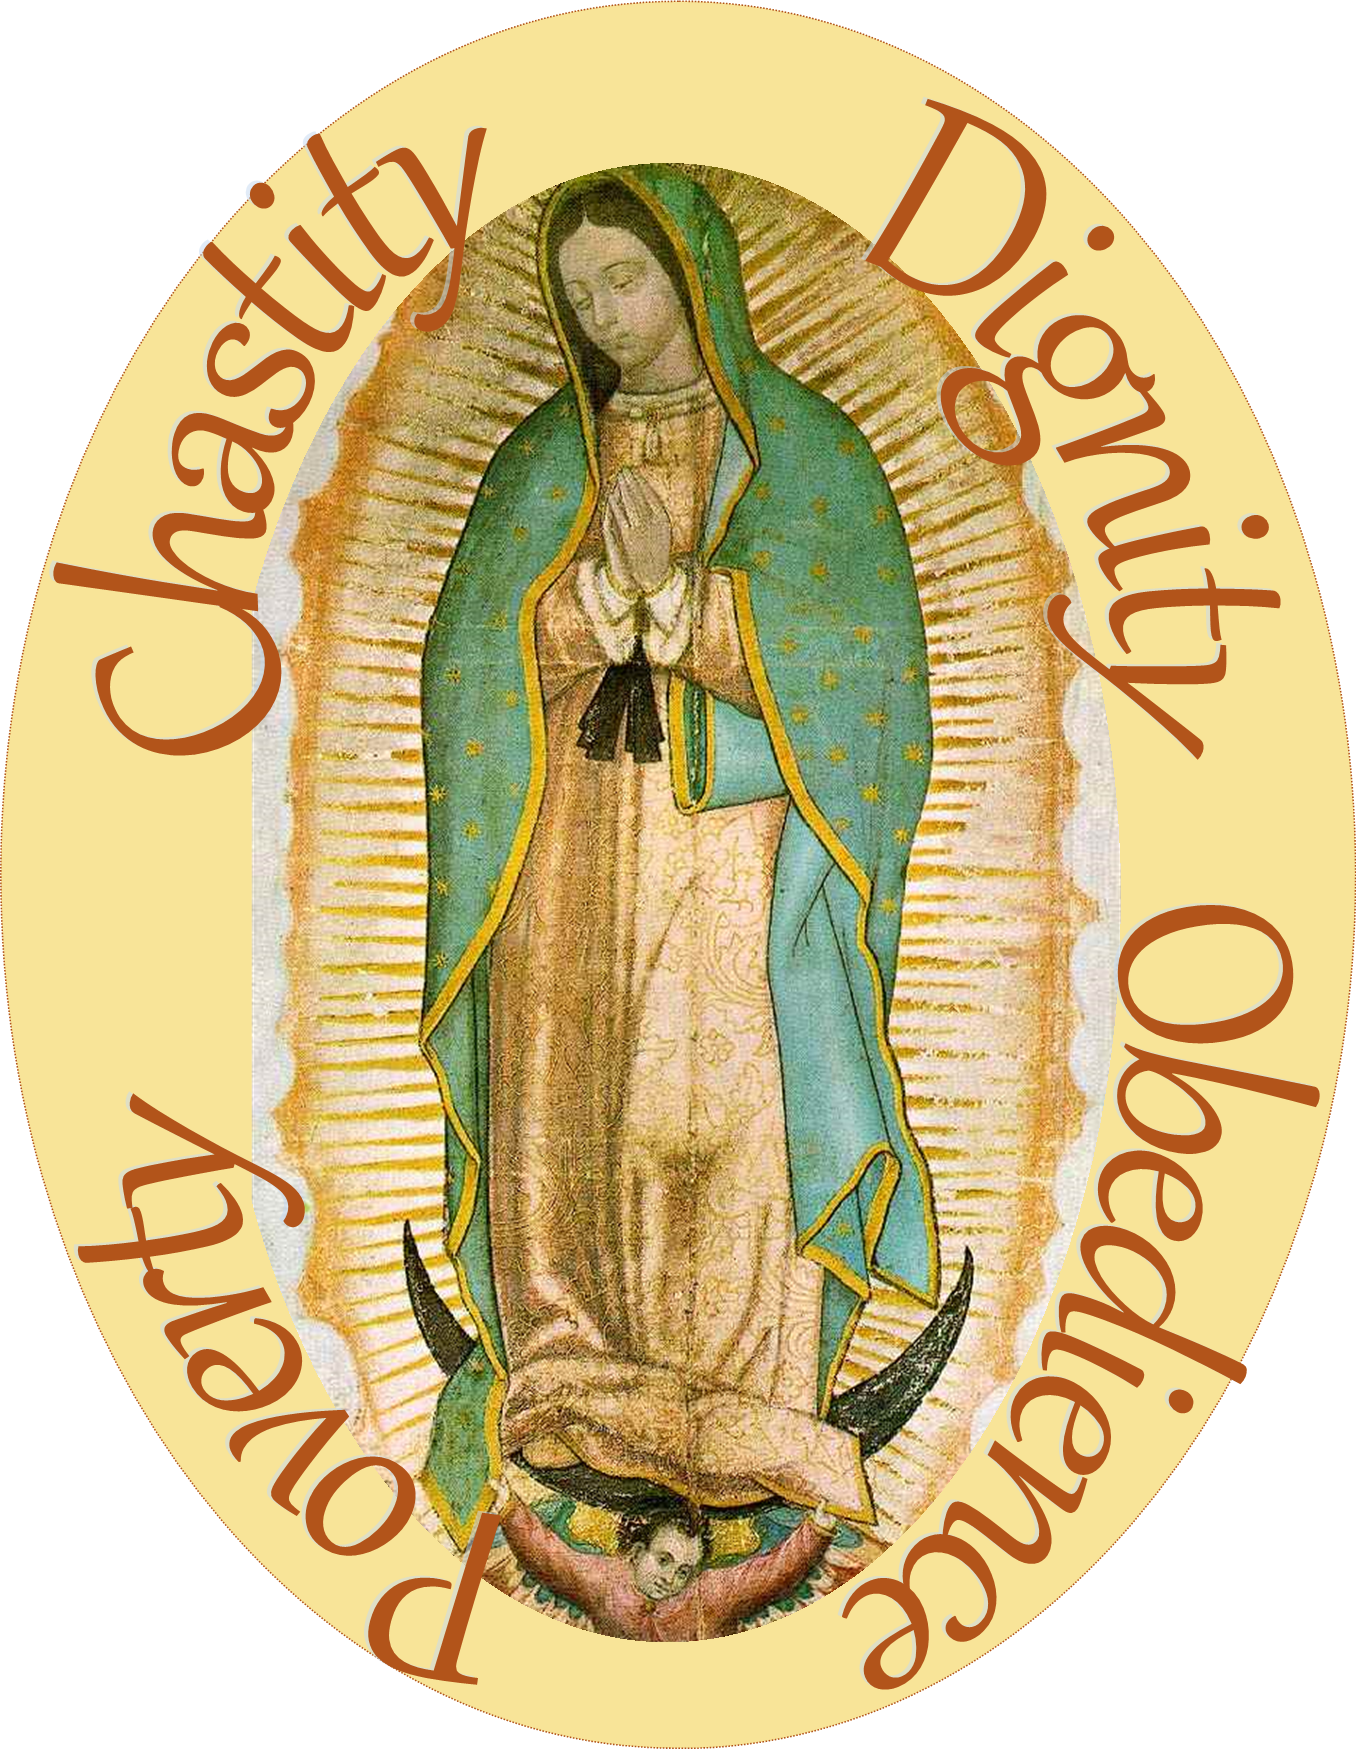 Or Lady of Guadalupe